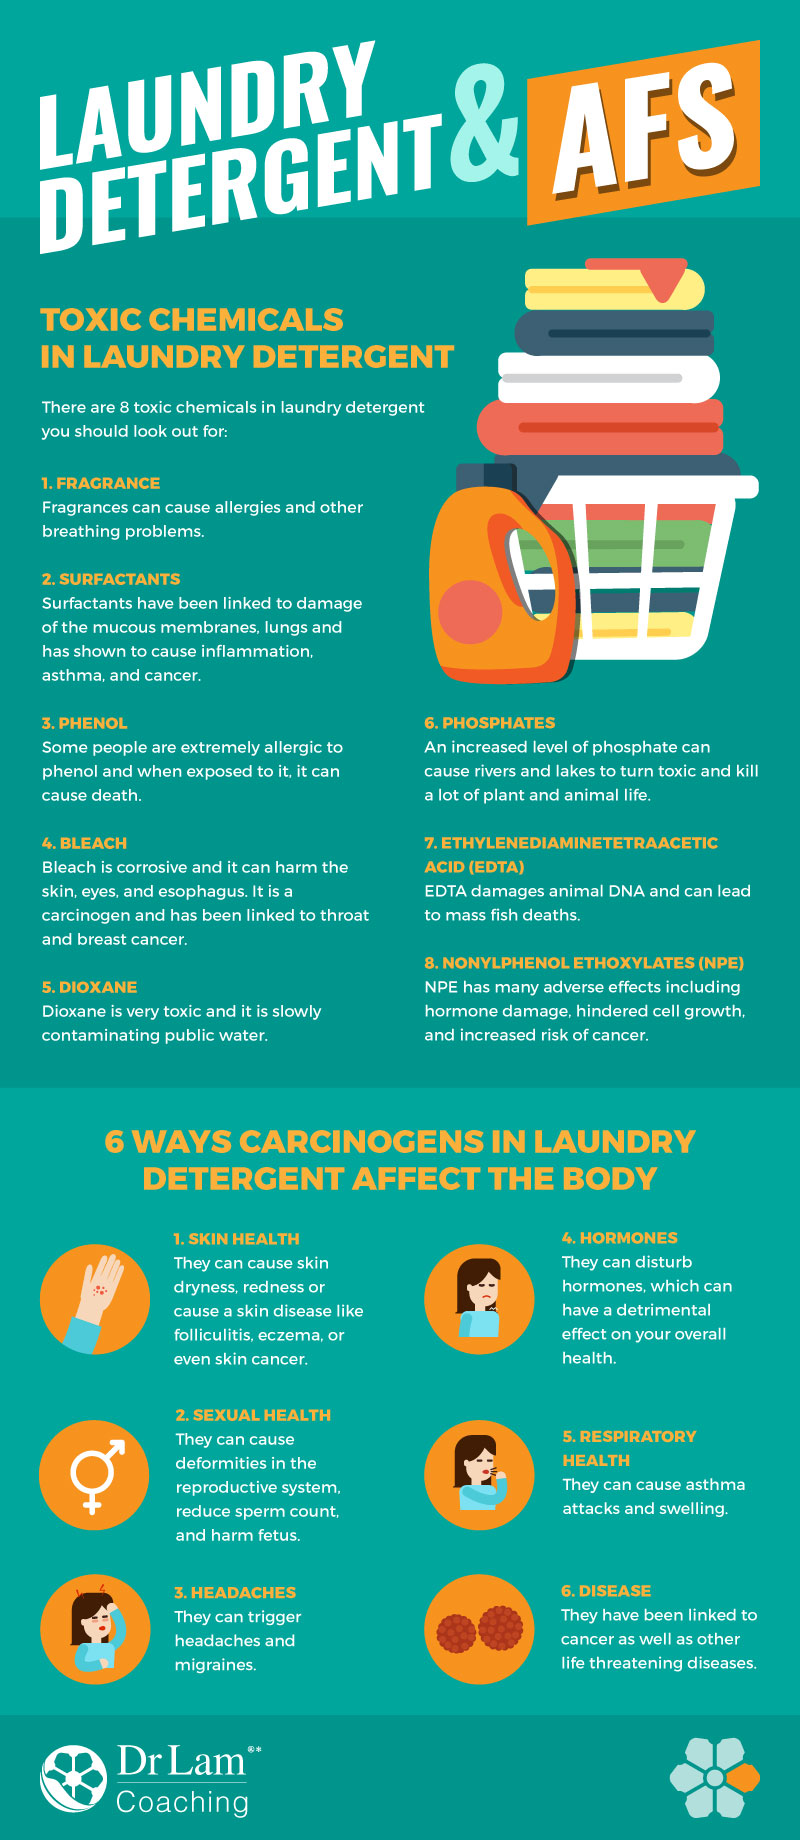 Check out this easy to understand infographic about carcinogens in laundry detergent and their effects to AFS